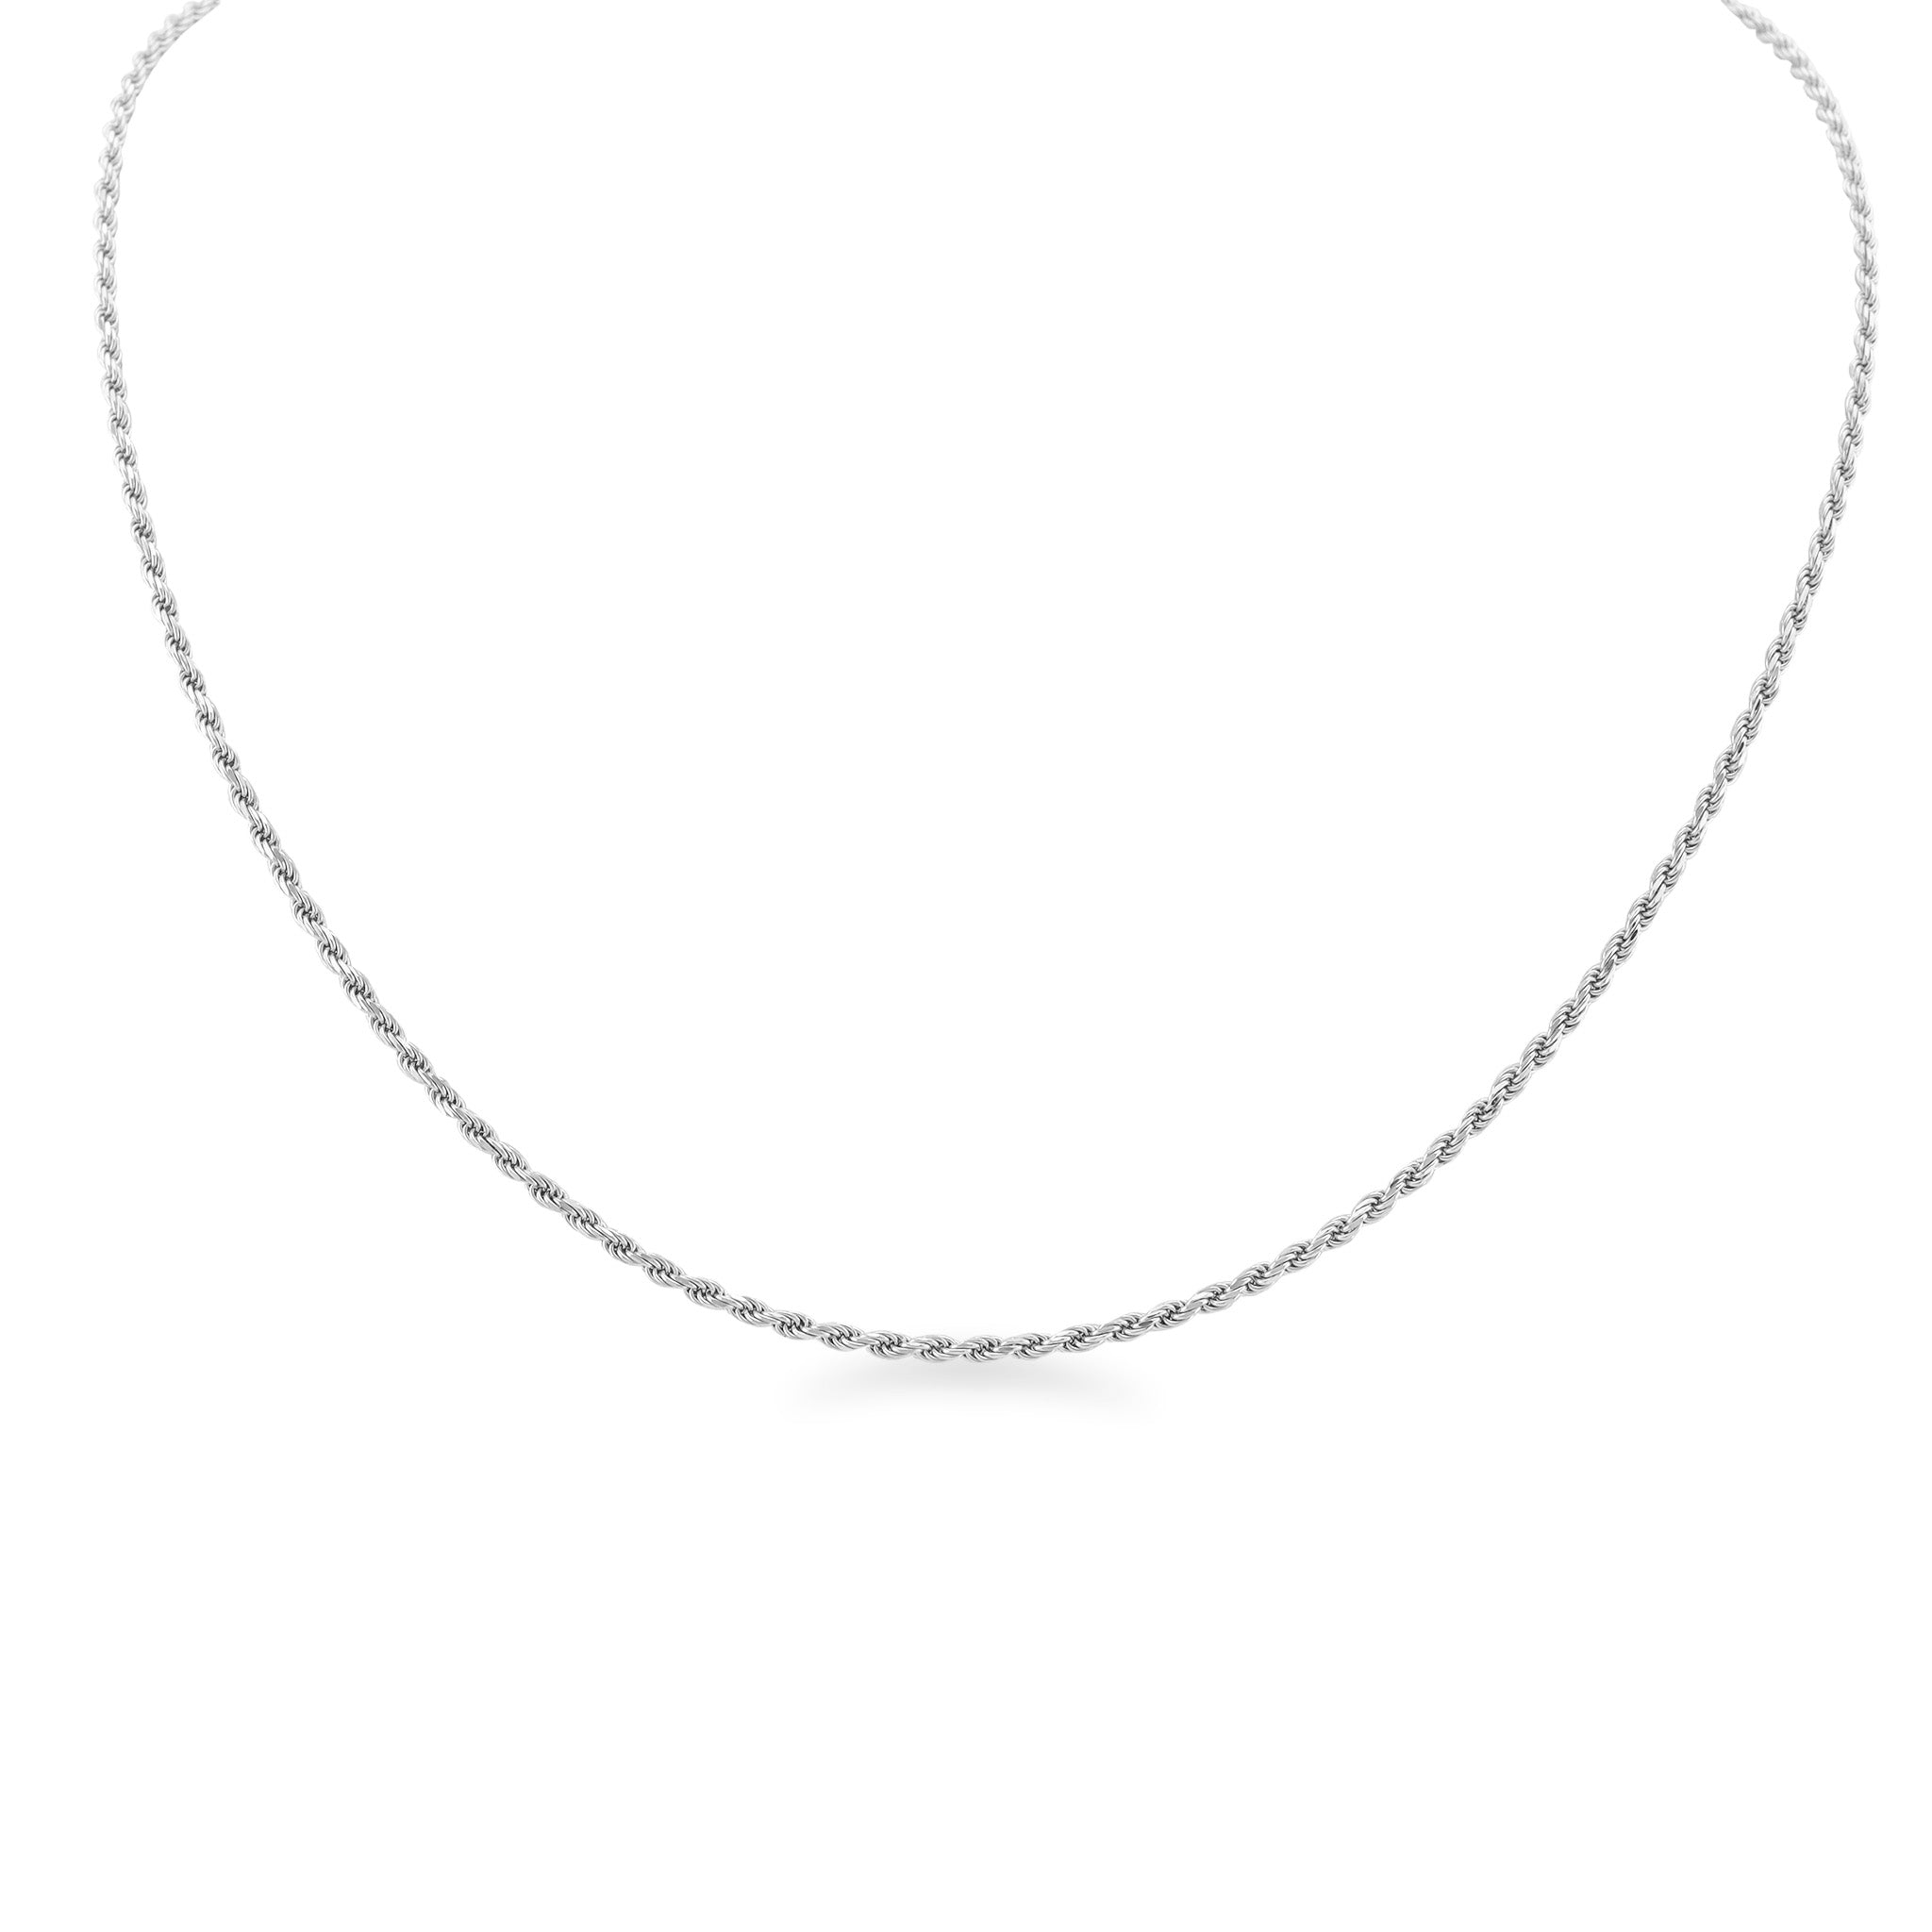 Necklaces Sterling Silver Platinum Plated Diamond Cut Rope Chain 2mm / 20 Wholesale Jewelry Website Unisex